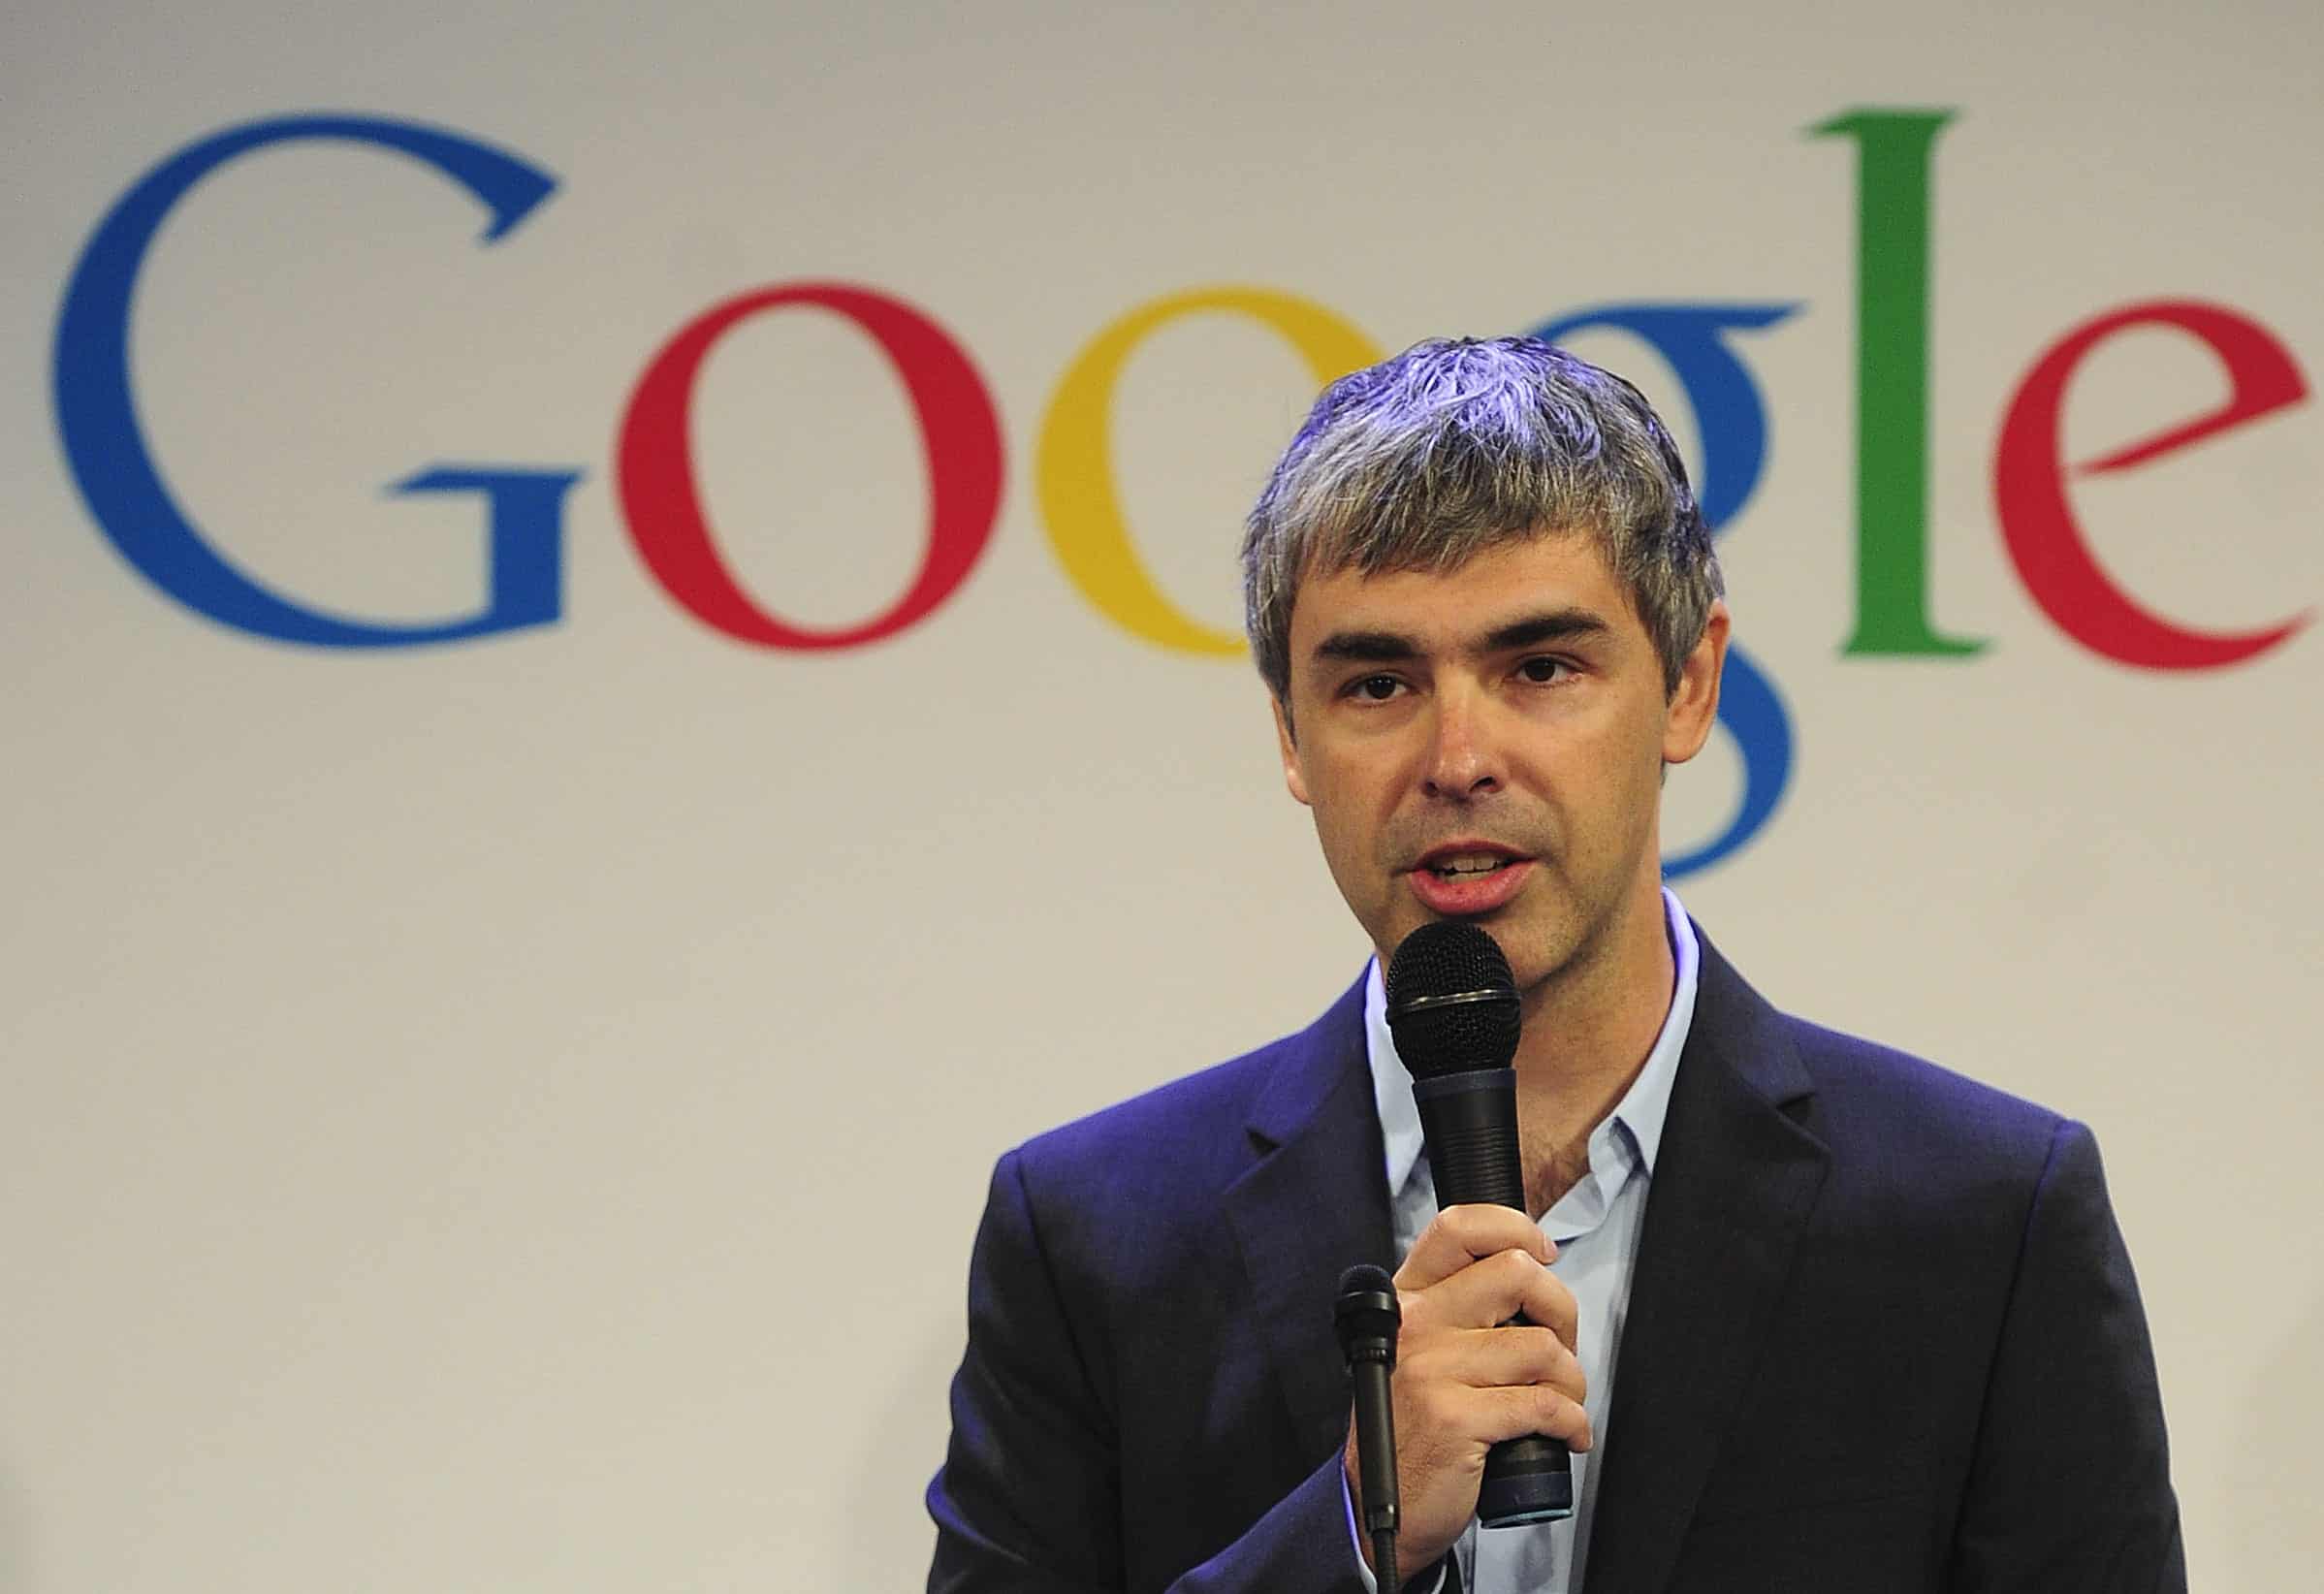 larry page india visit